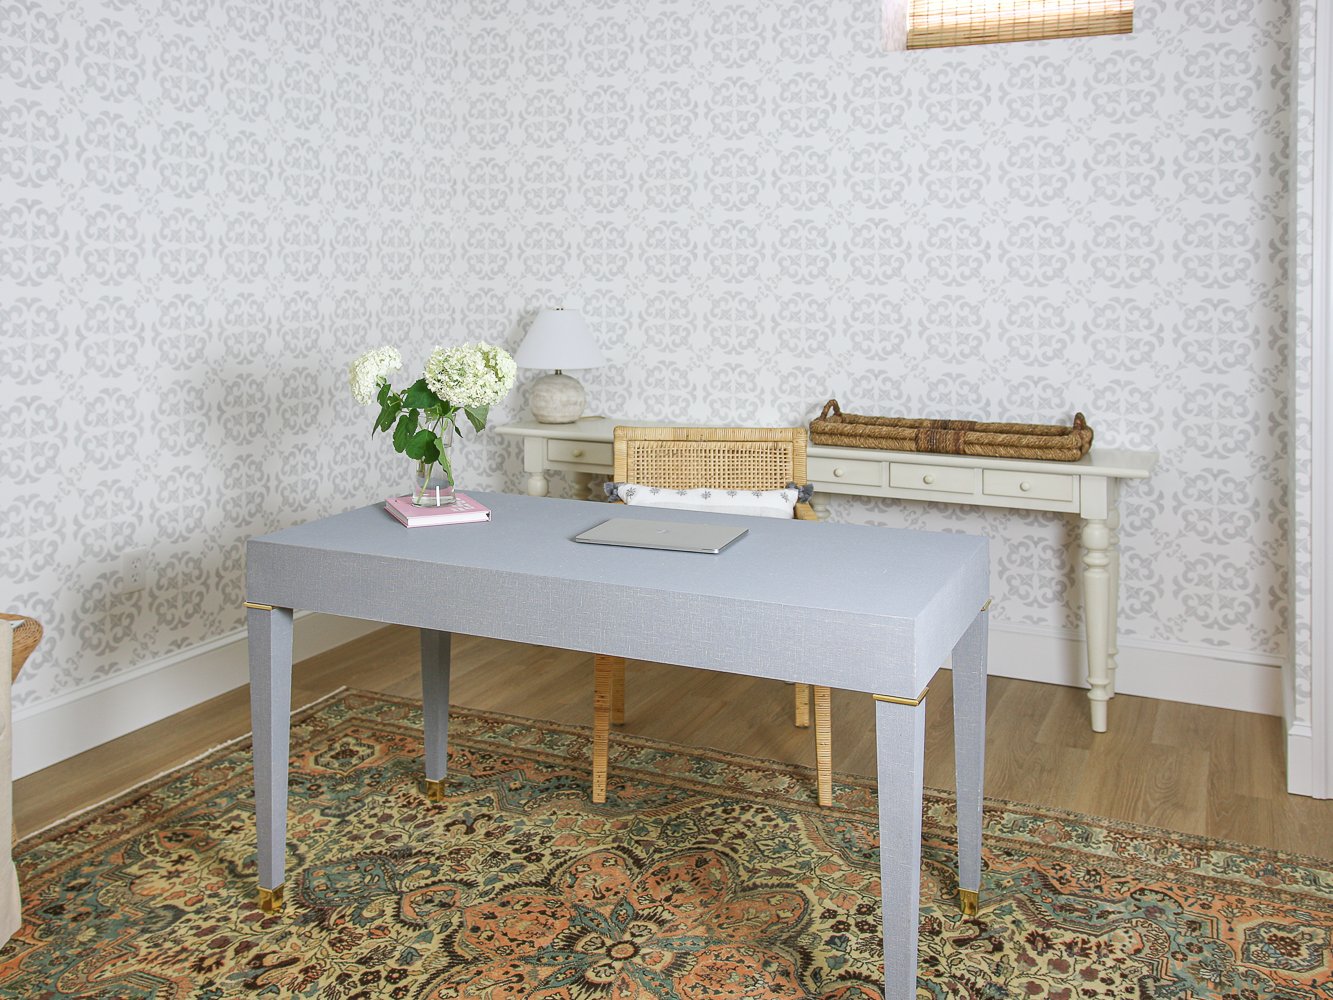 Serena and lily wallpaper, home office, feminine decor, mcgee and co desk, rattan arm chair